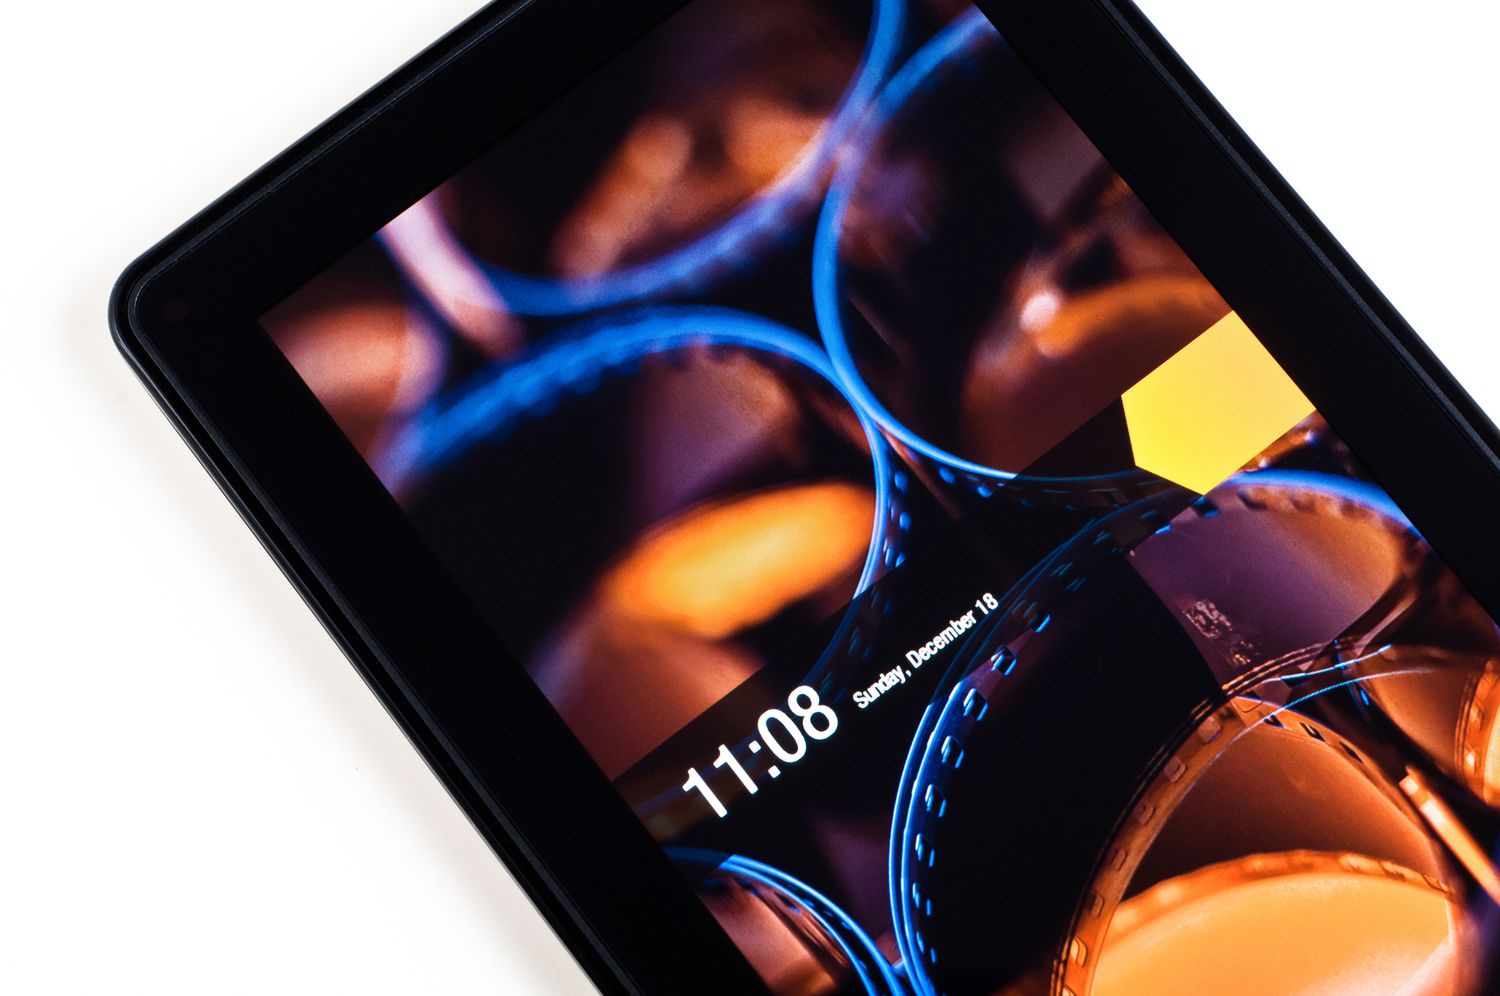 How To Root An Amazon Fire Tablet